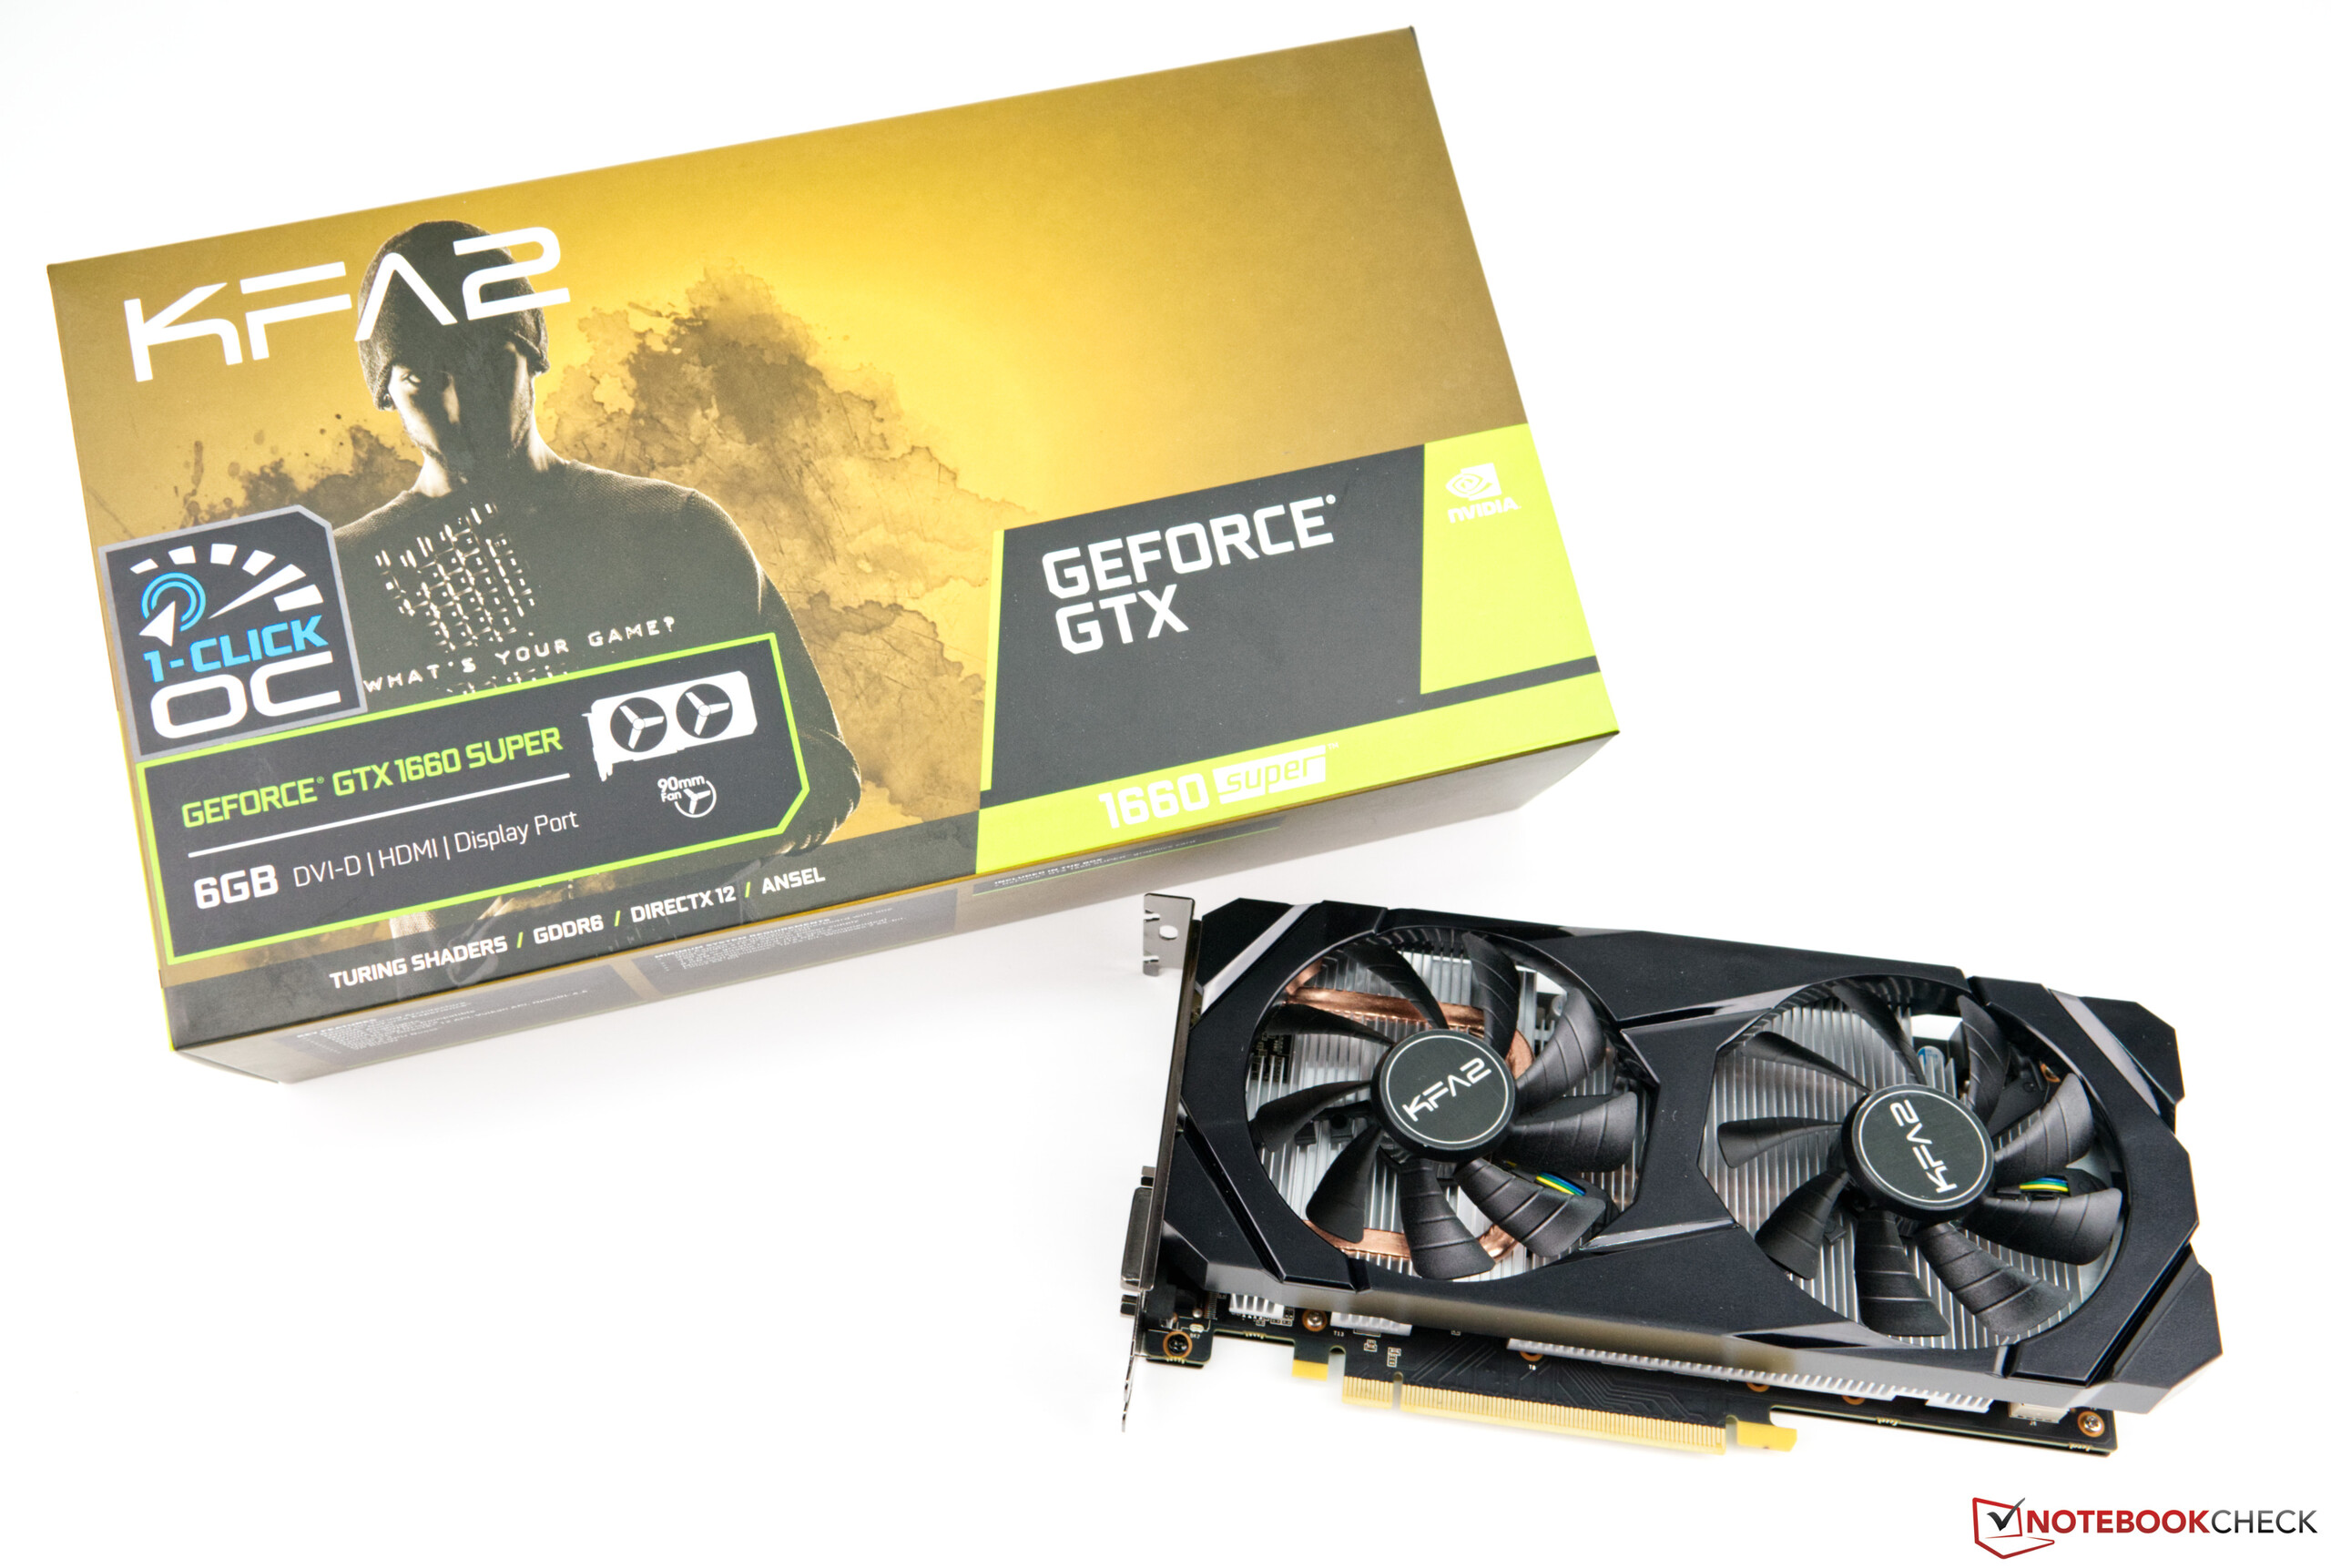 NVIDIA GeForce GTX 980M - DirectX 12 benchmark and all you need to